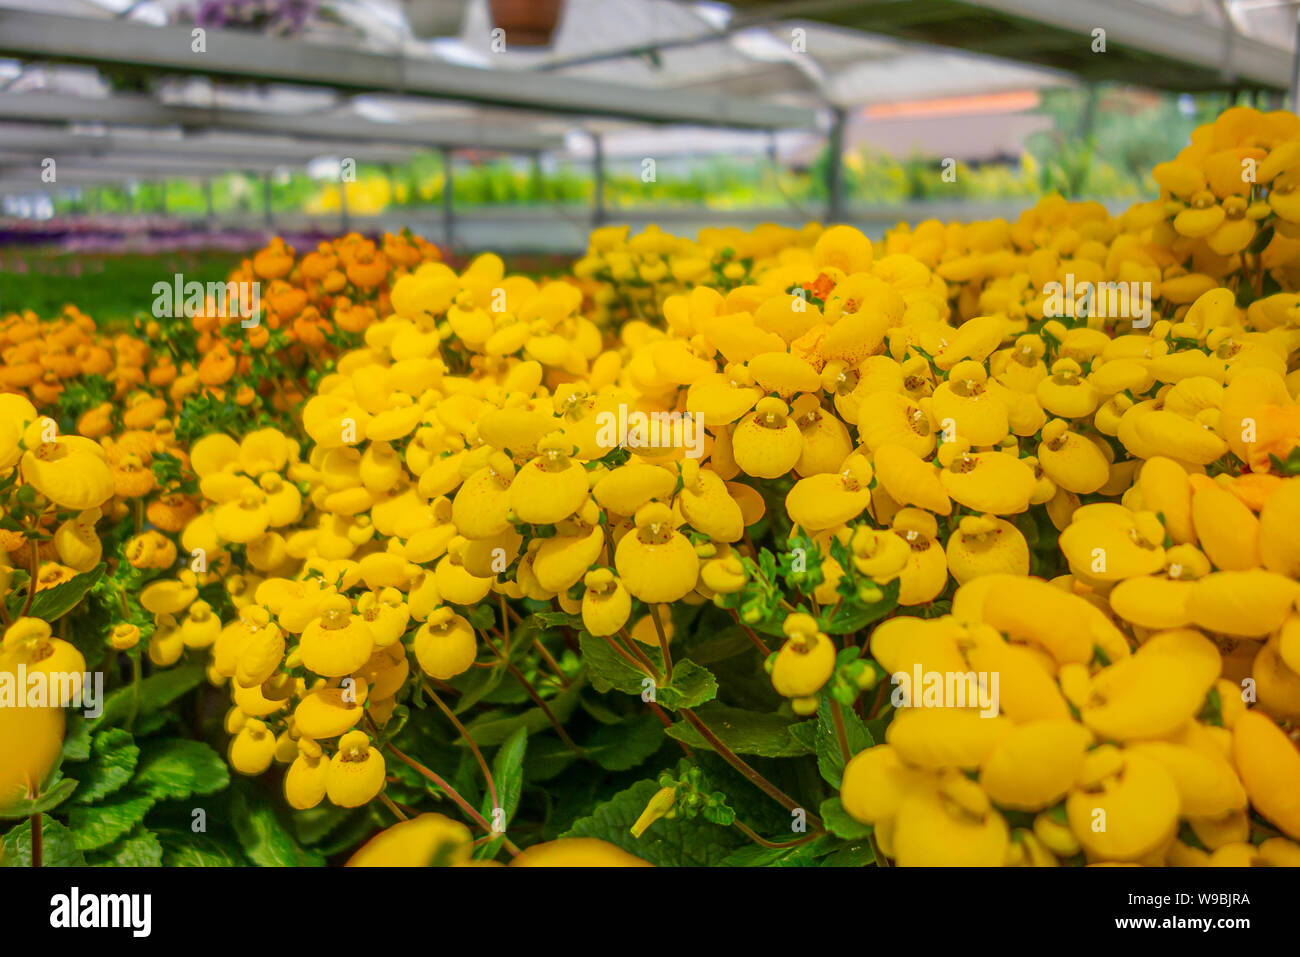 yellow slipper flowers in a greenhouse Stock Photo